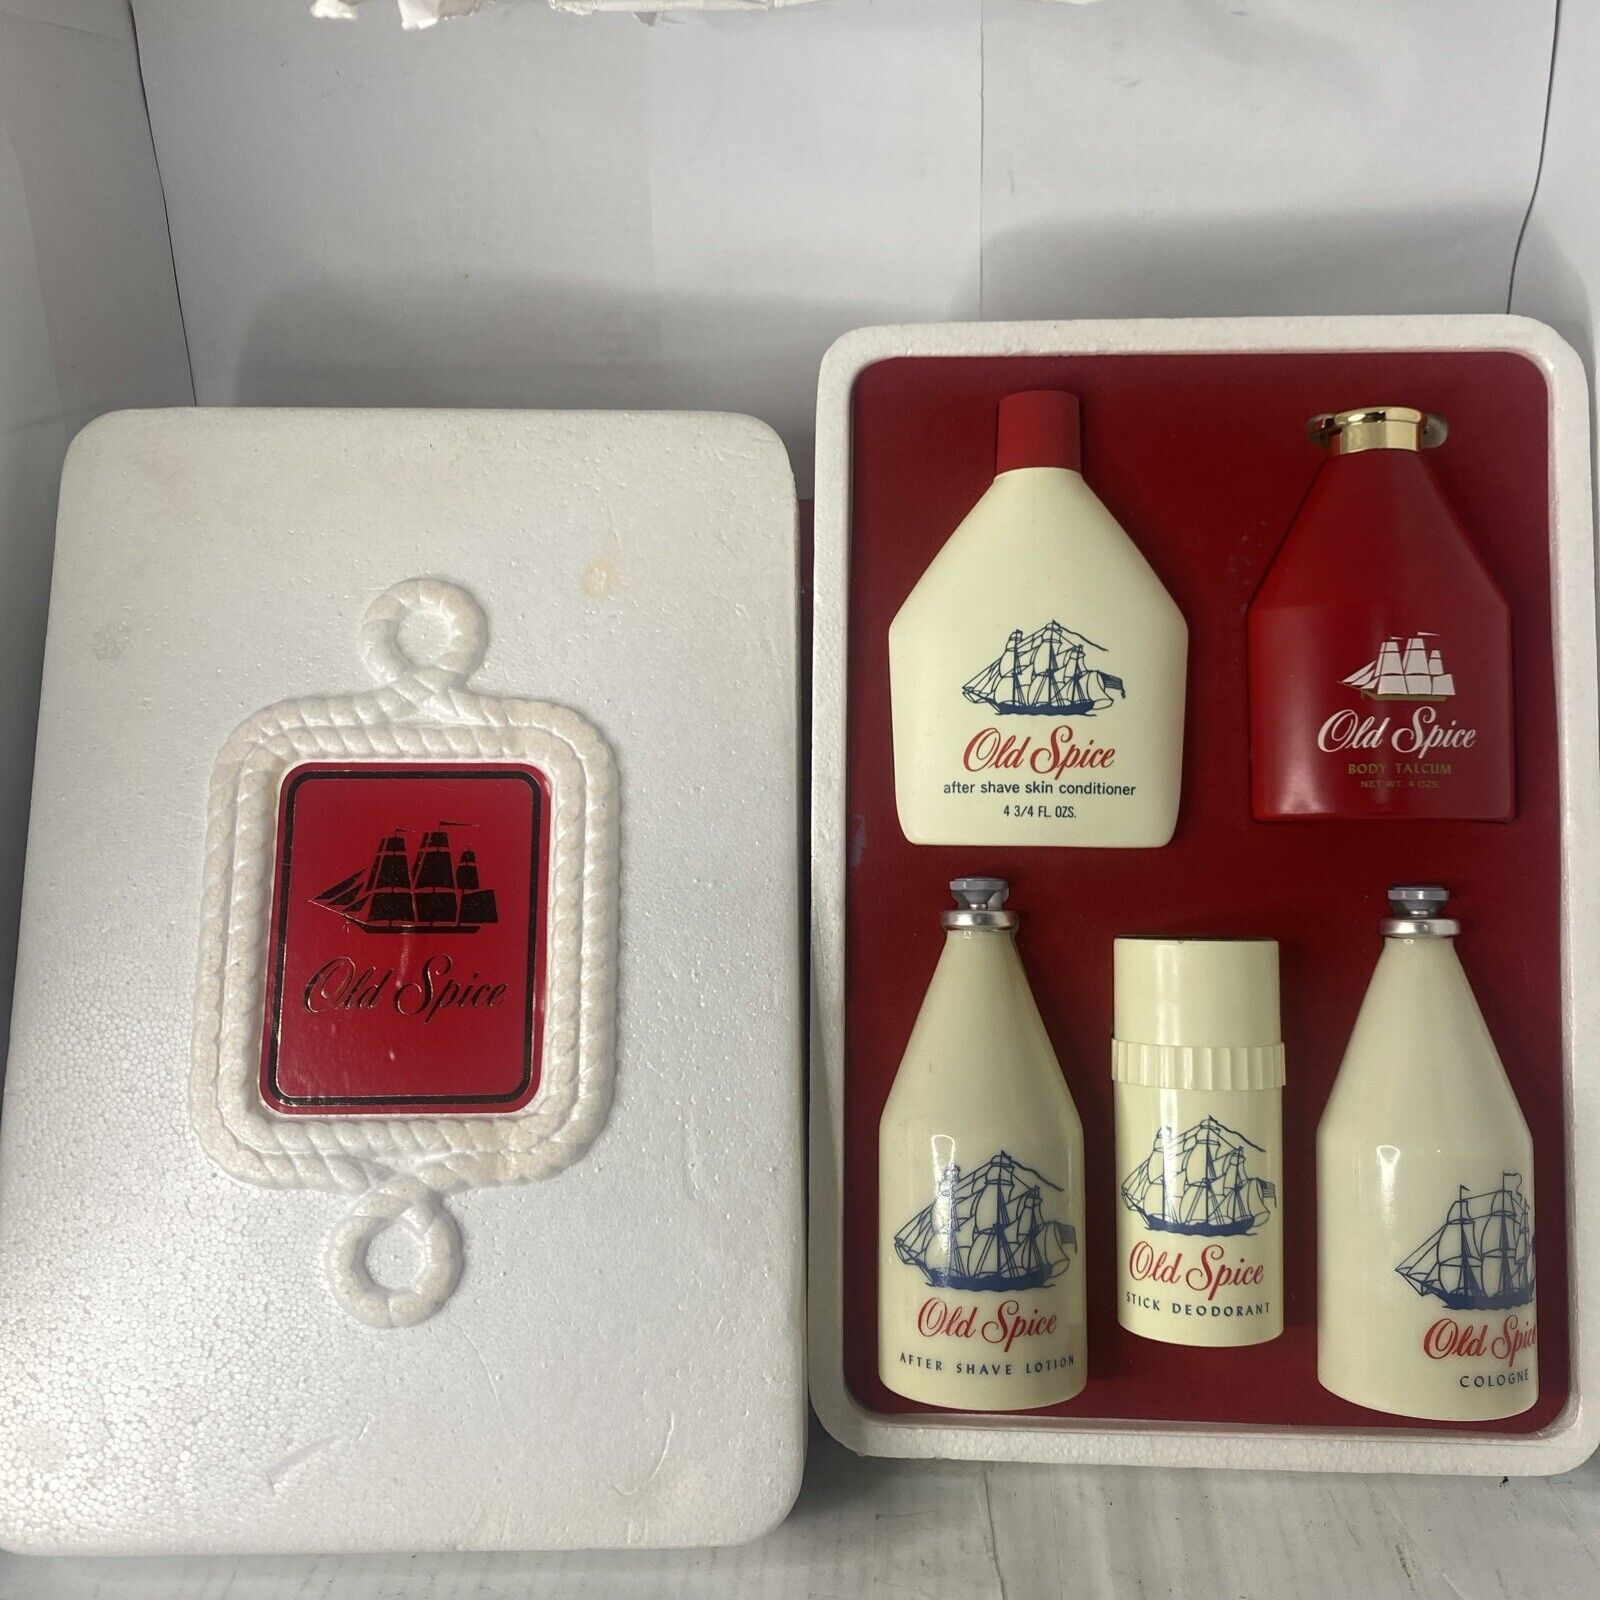 Rare Vintage Old Spice Ship Recovery 1794 Toiletries Gift Set Box (No. 3636)